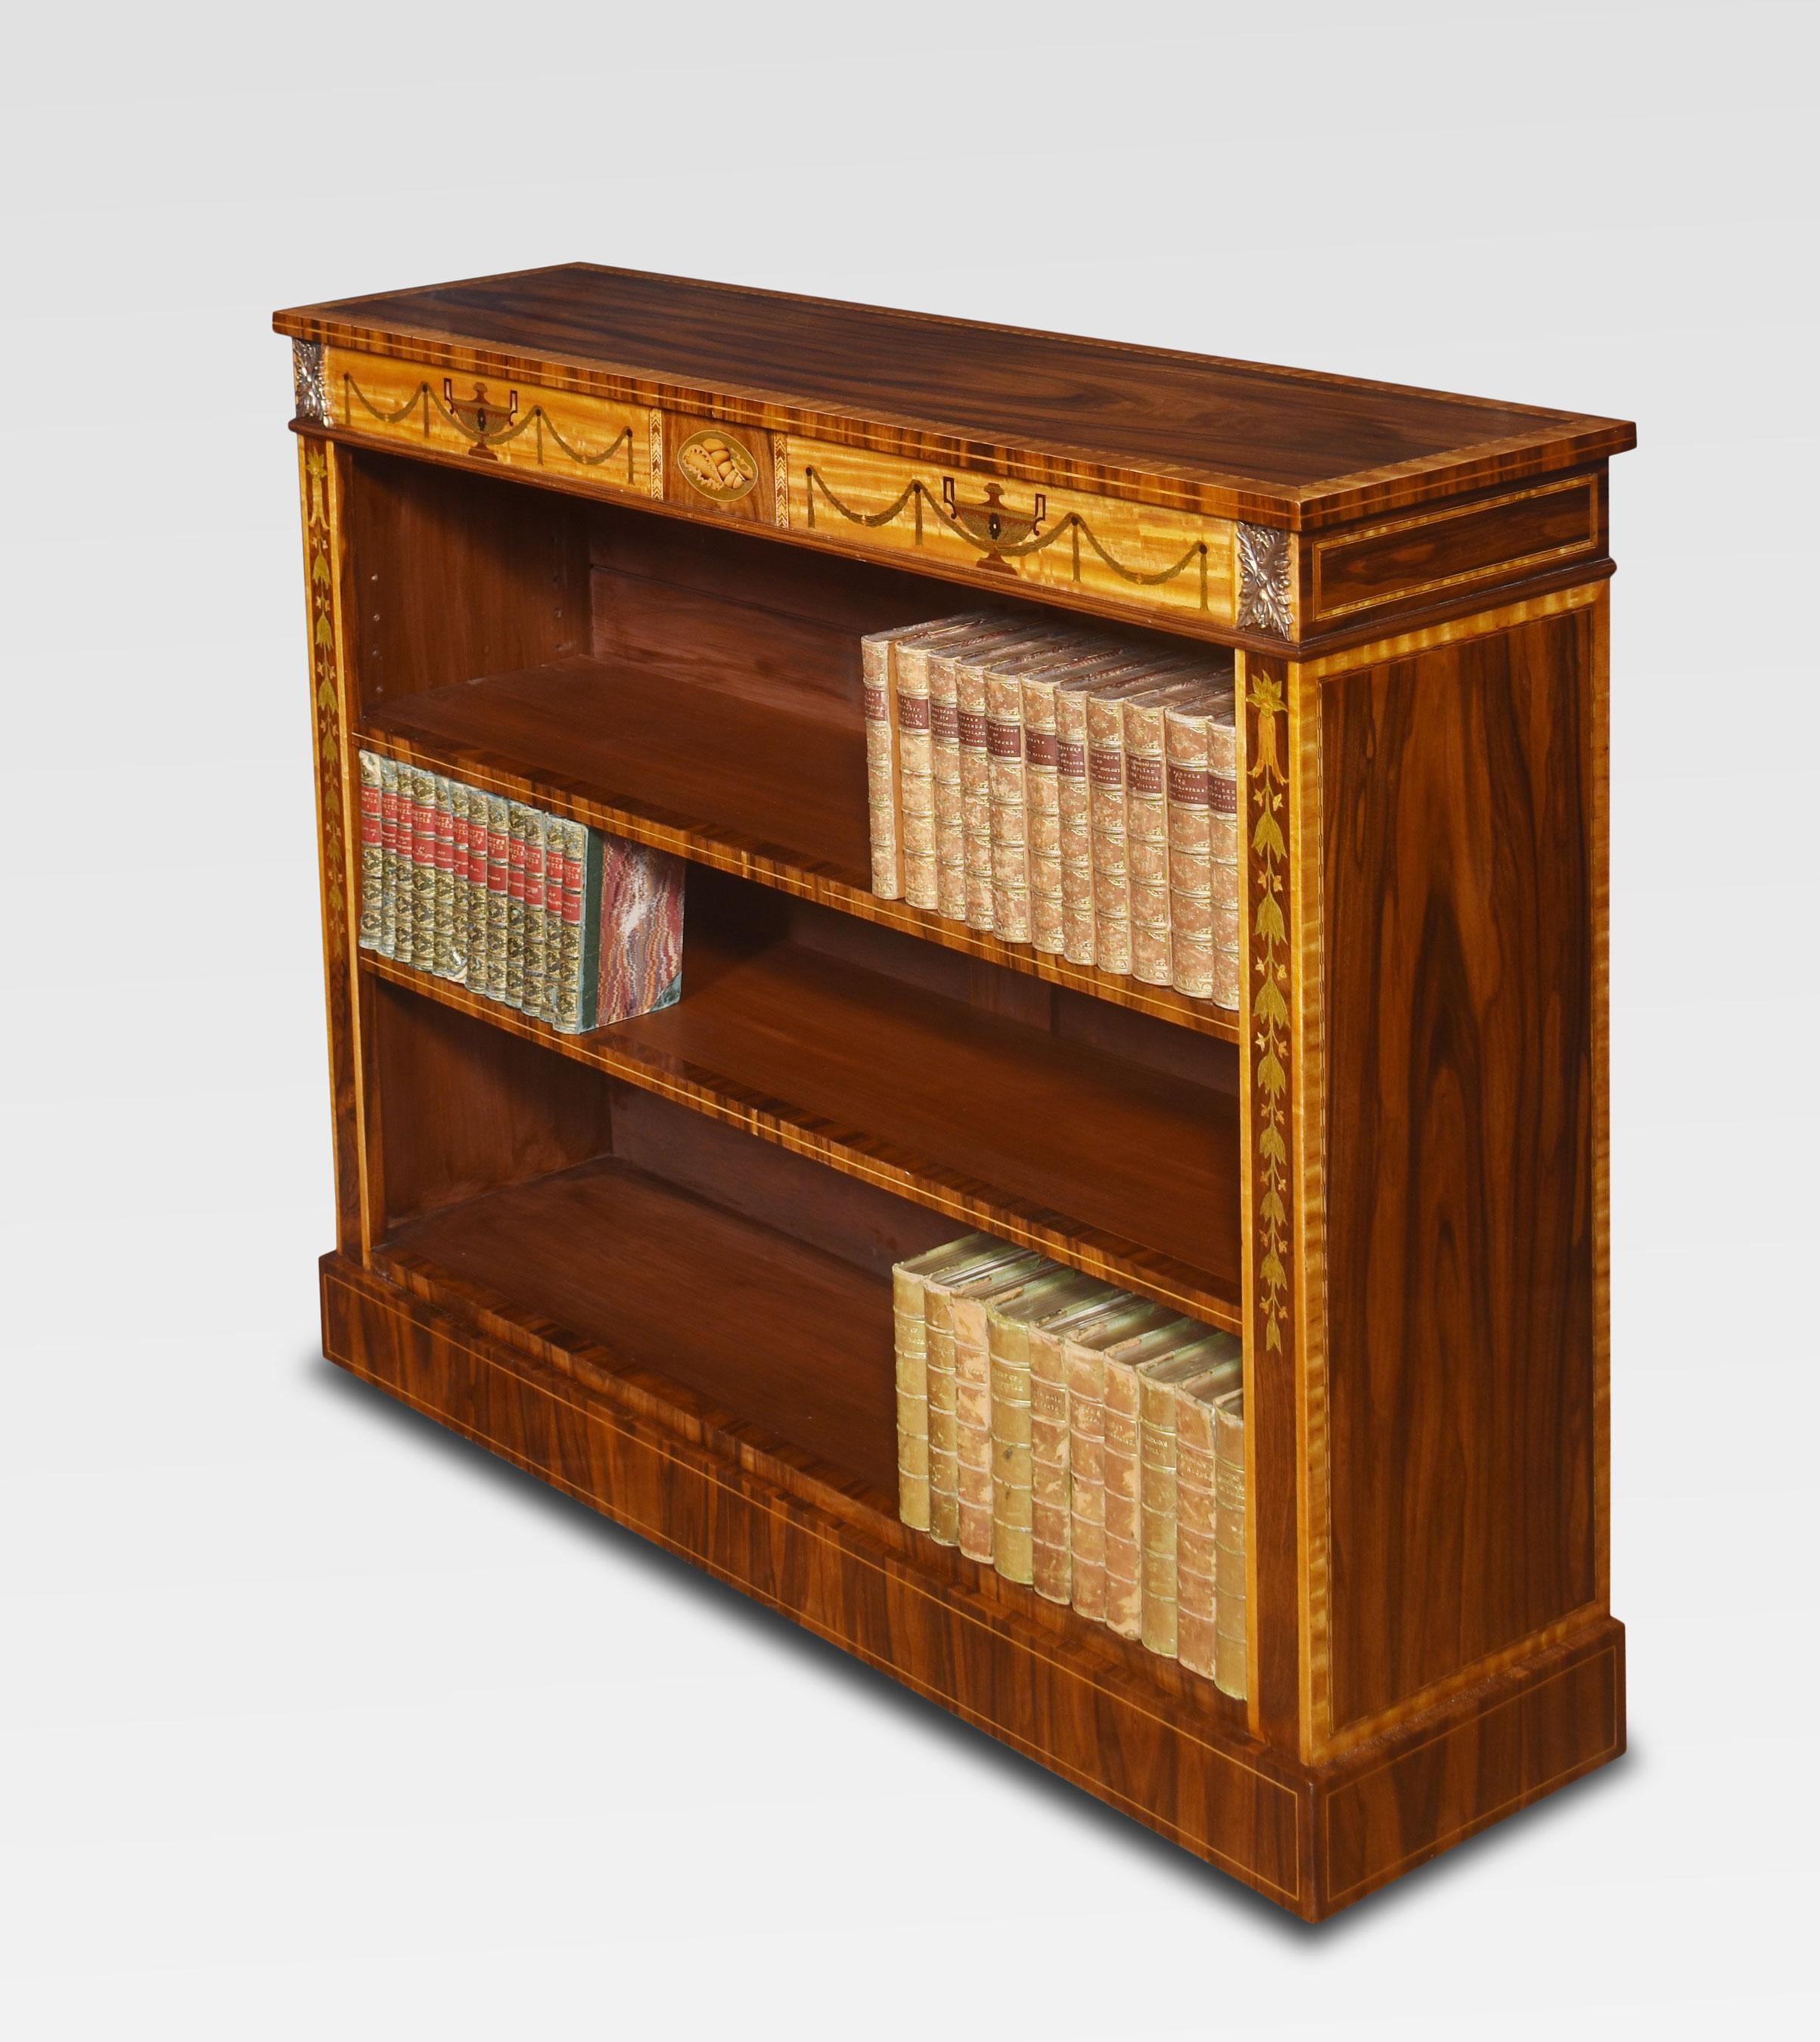 Sheraton revival bookcase, the rectangular cross banded top above the inlaid urn and ribbon tied swag decorated frieze. The bookcase is fitted with two adjustable shelves. All raised up on a plinth base.
Dimensions
Height 37 Inches
Width 43